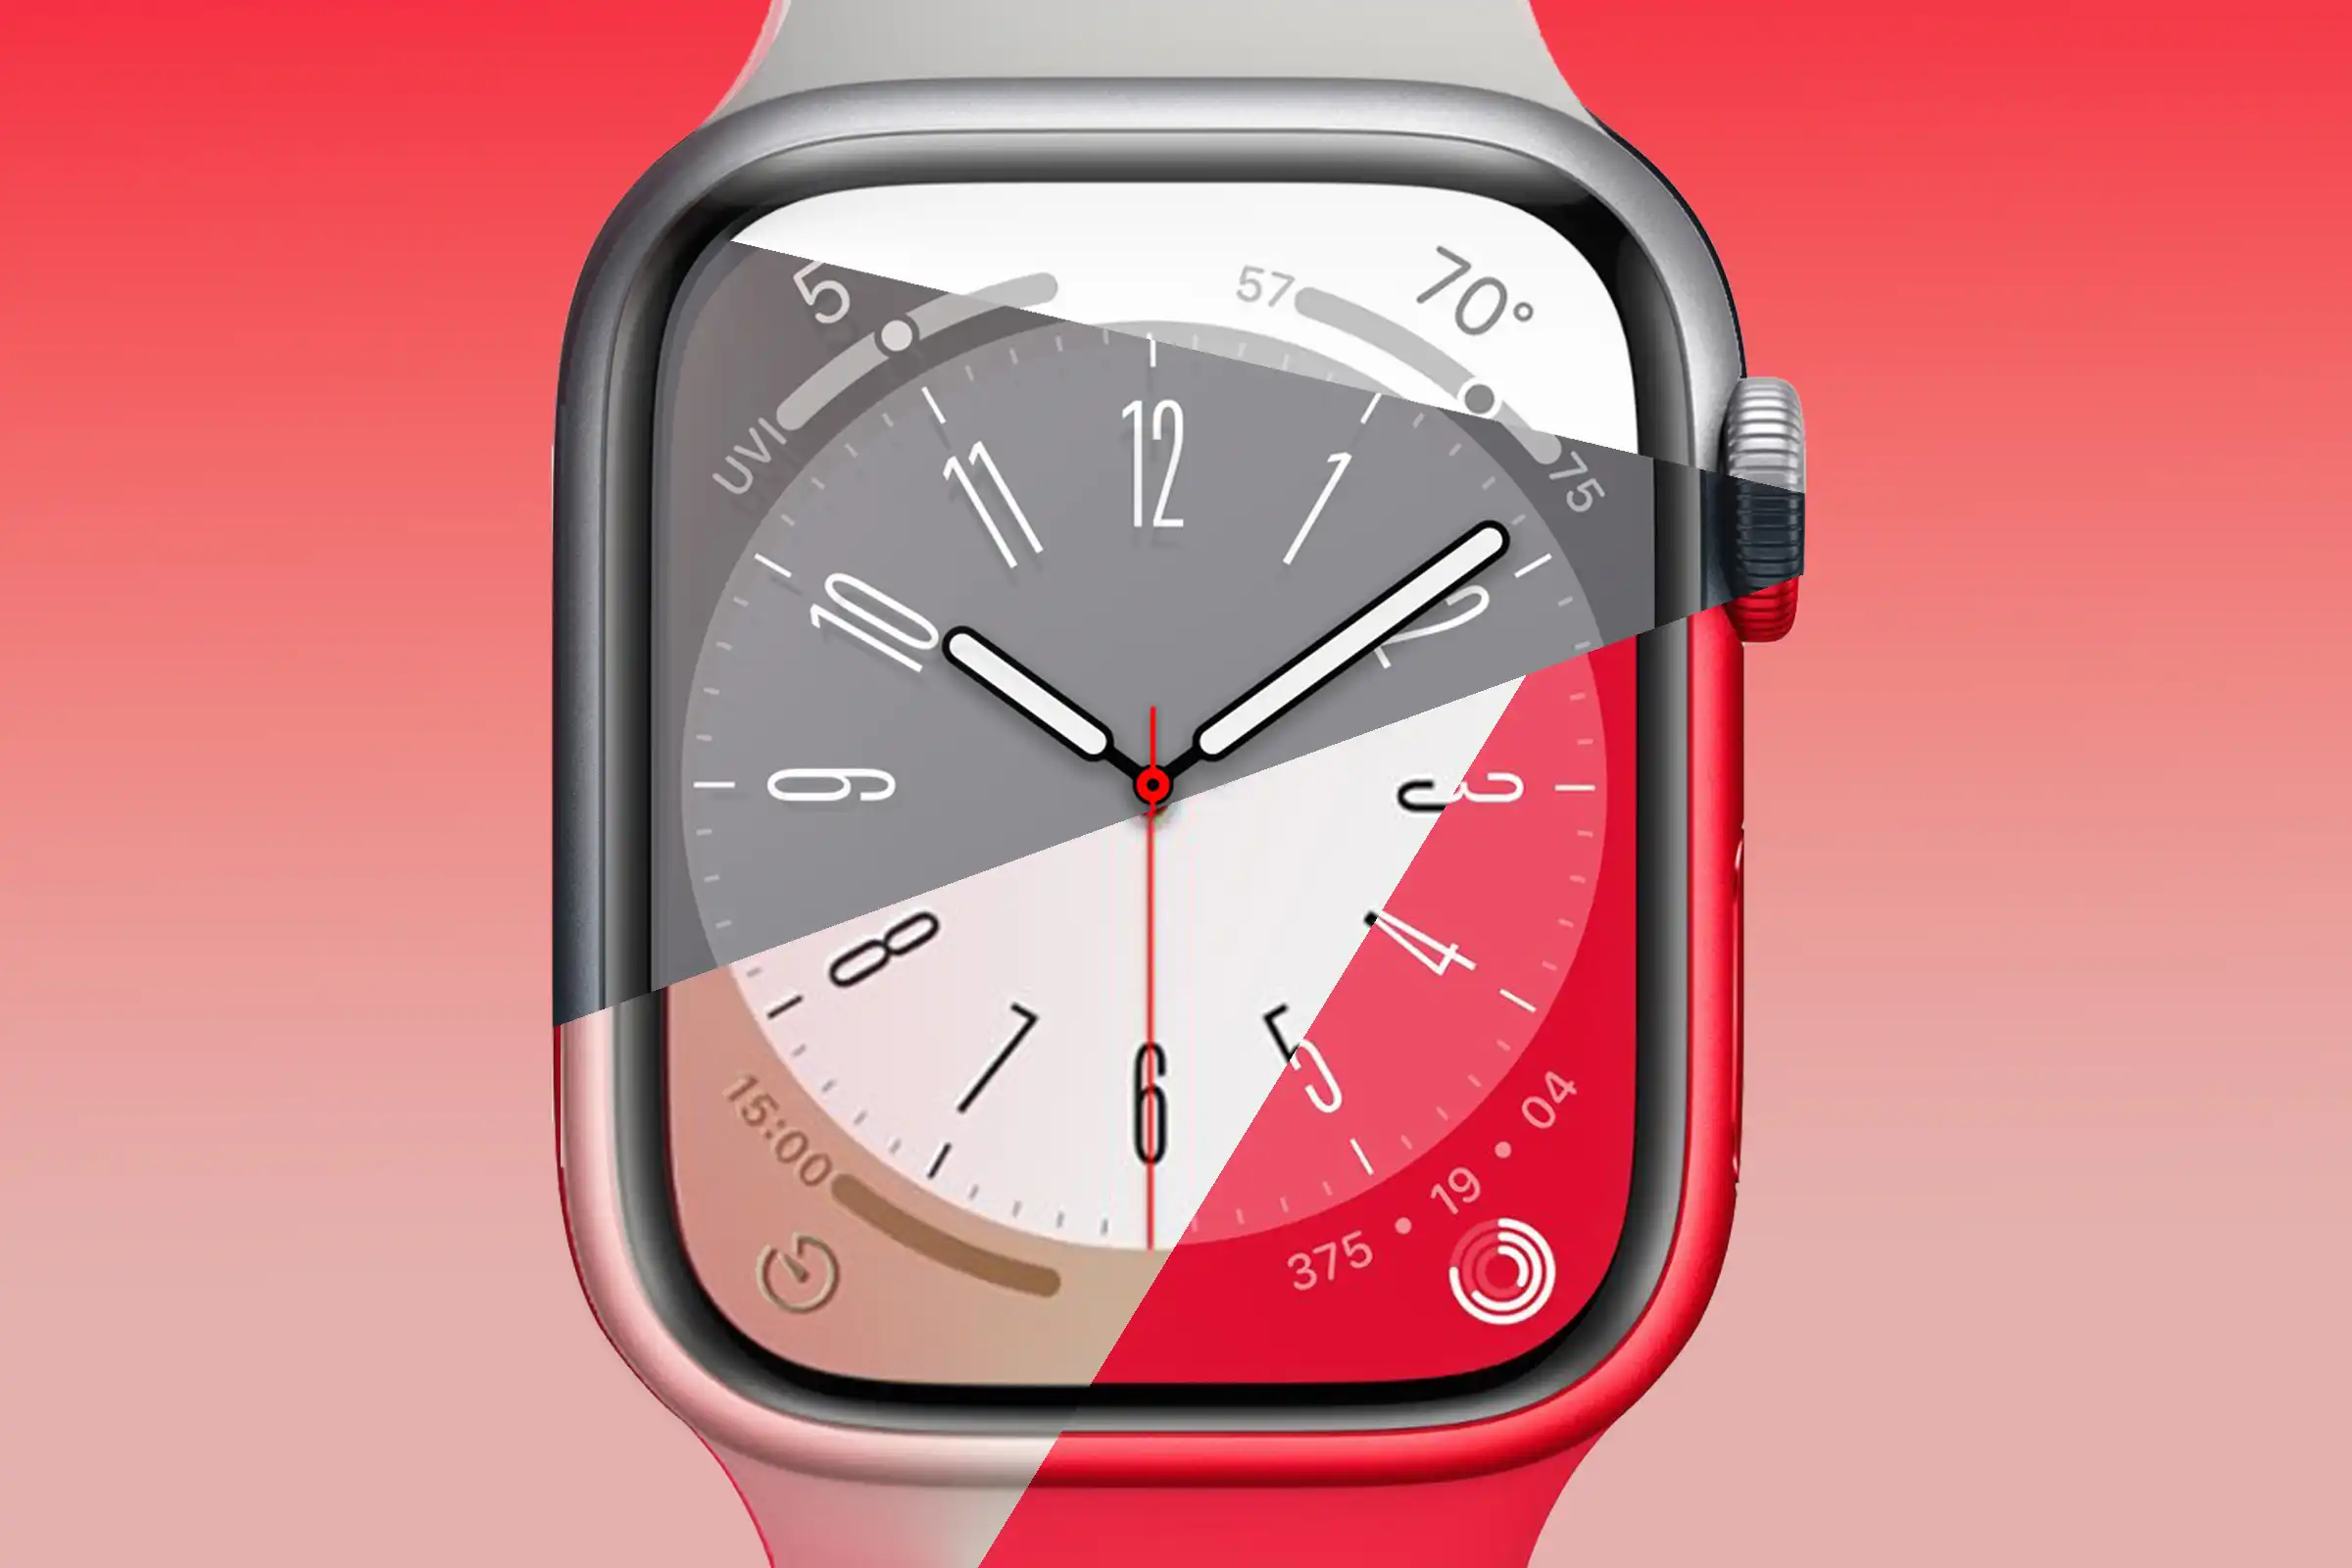 Is the Apple Watch suffering an existential crisis?